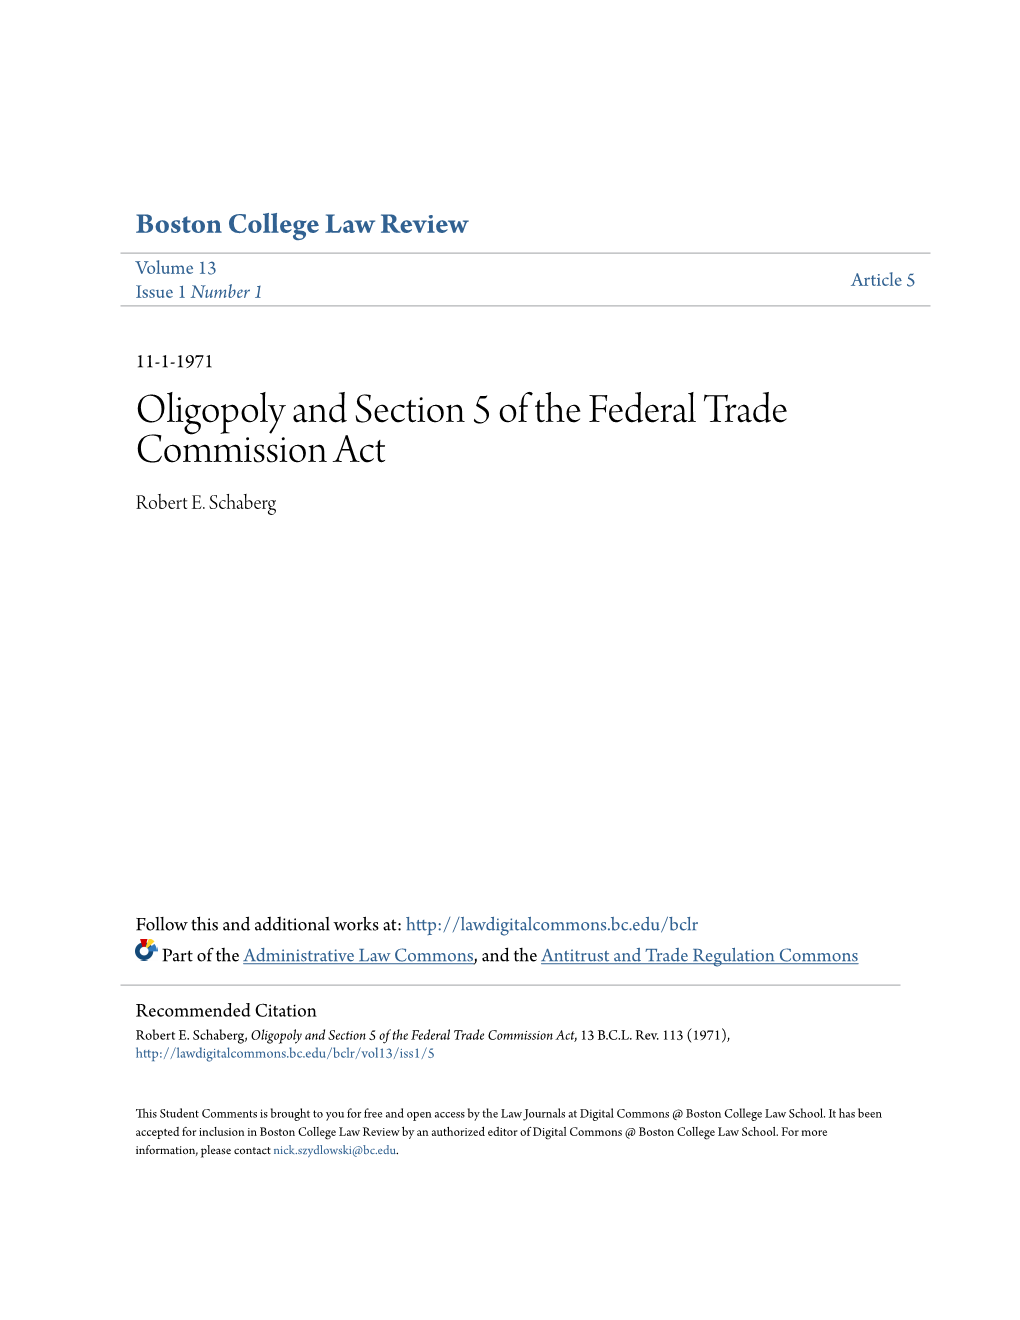 Oligopoly and Section 5 of the Federal Trade Commission Act Robert E